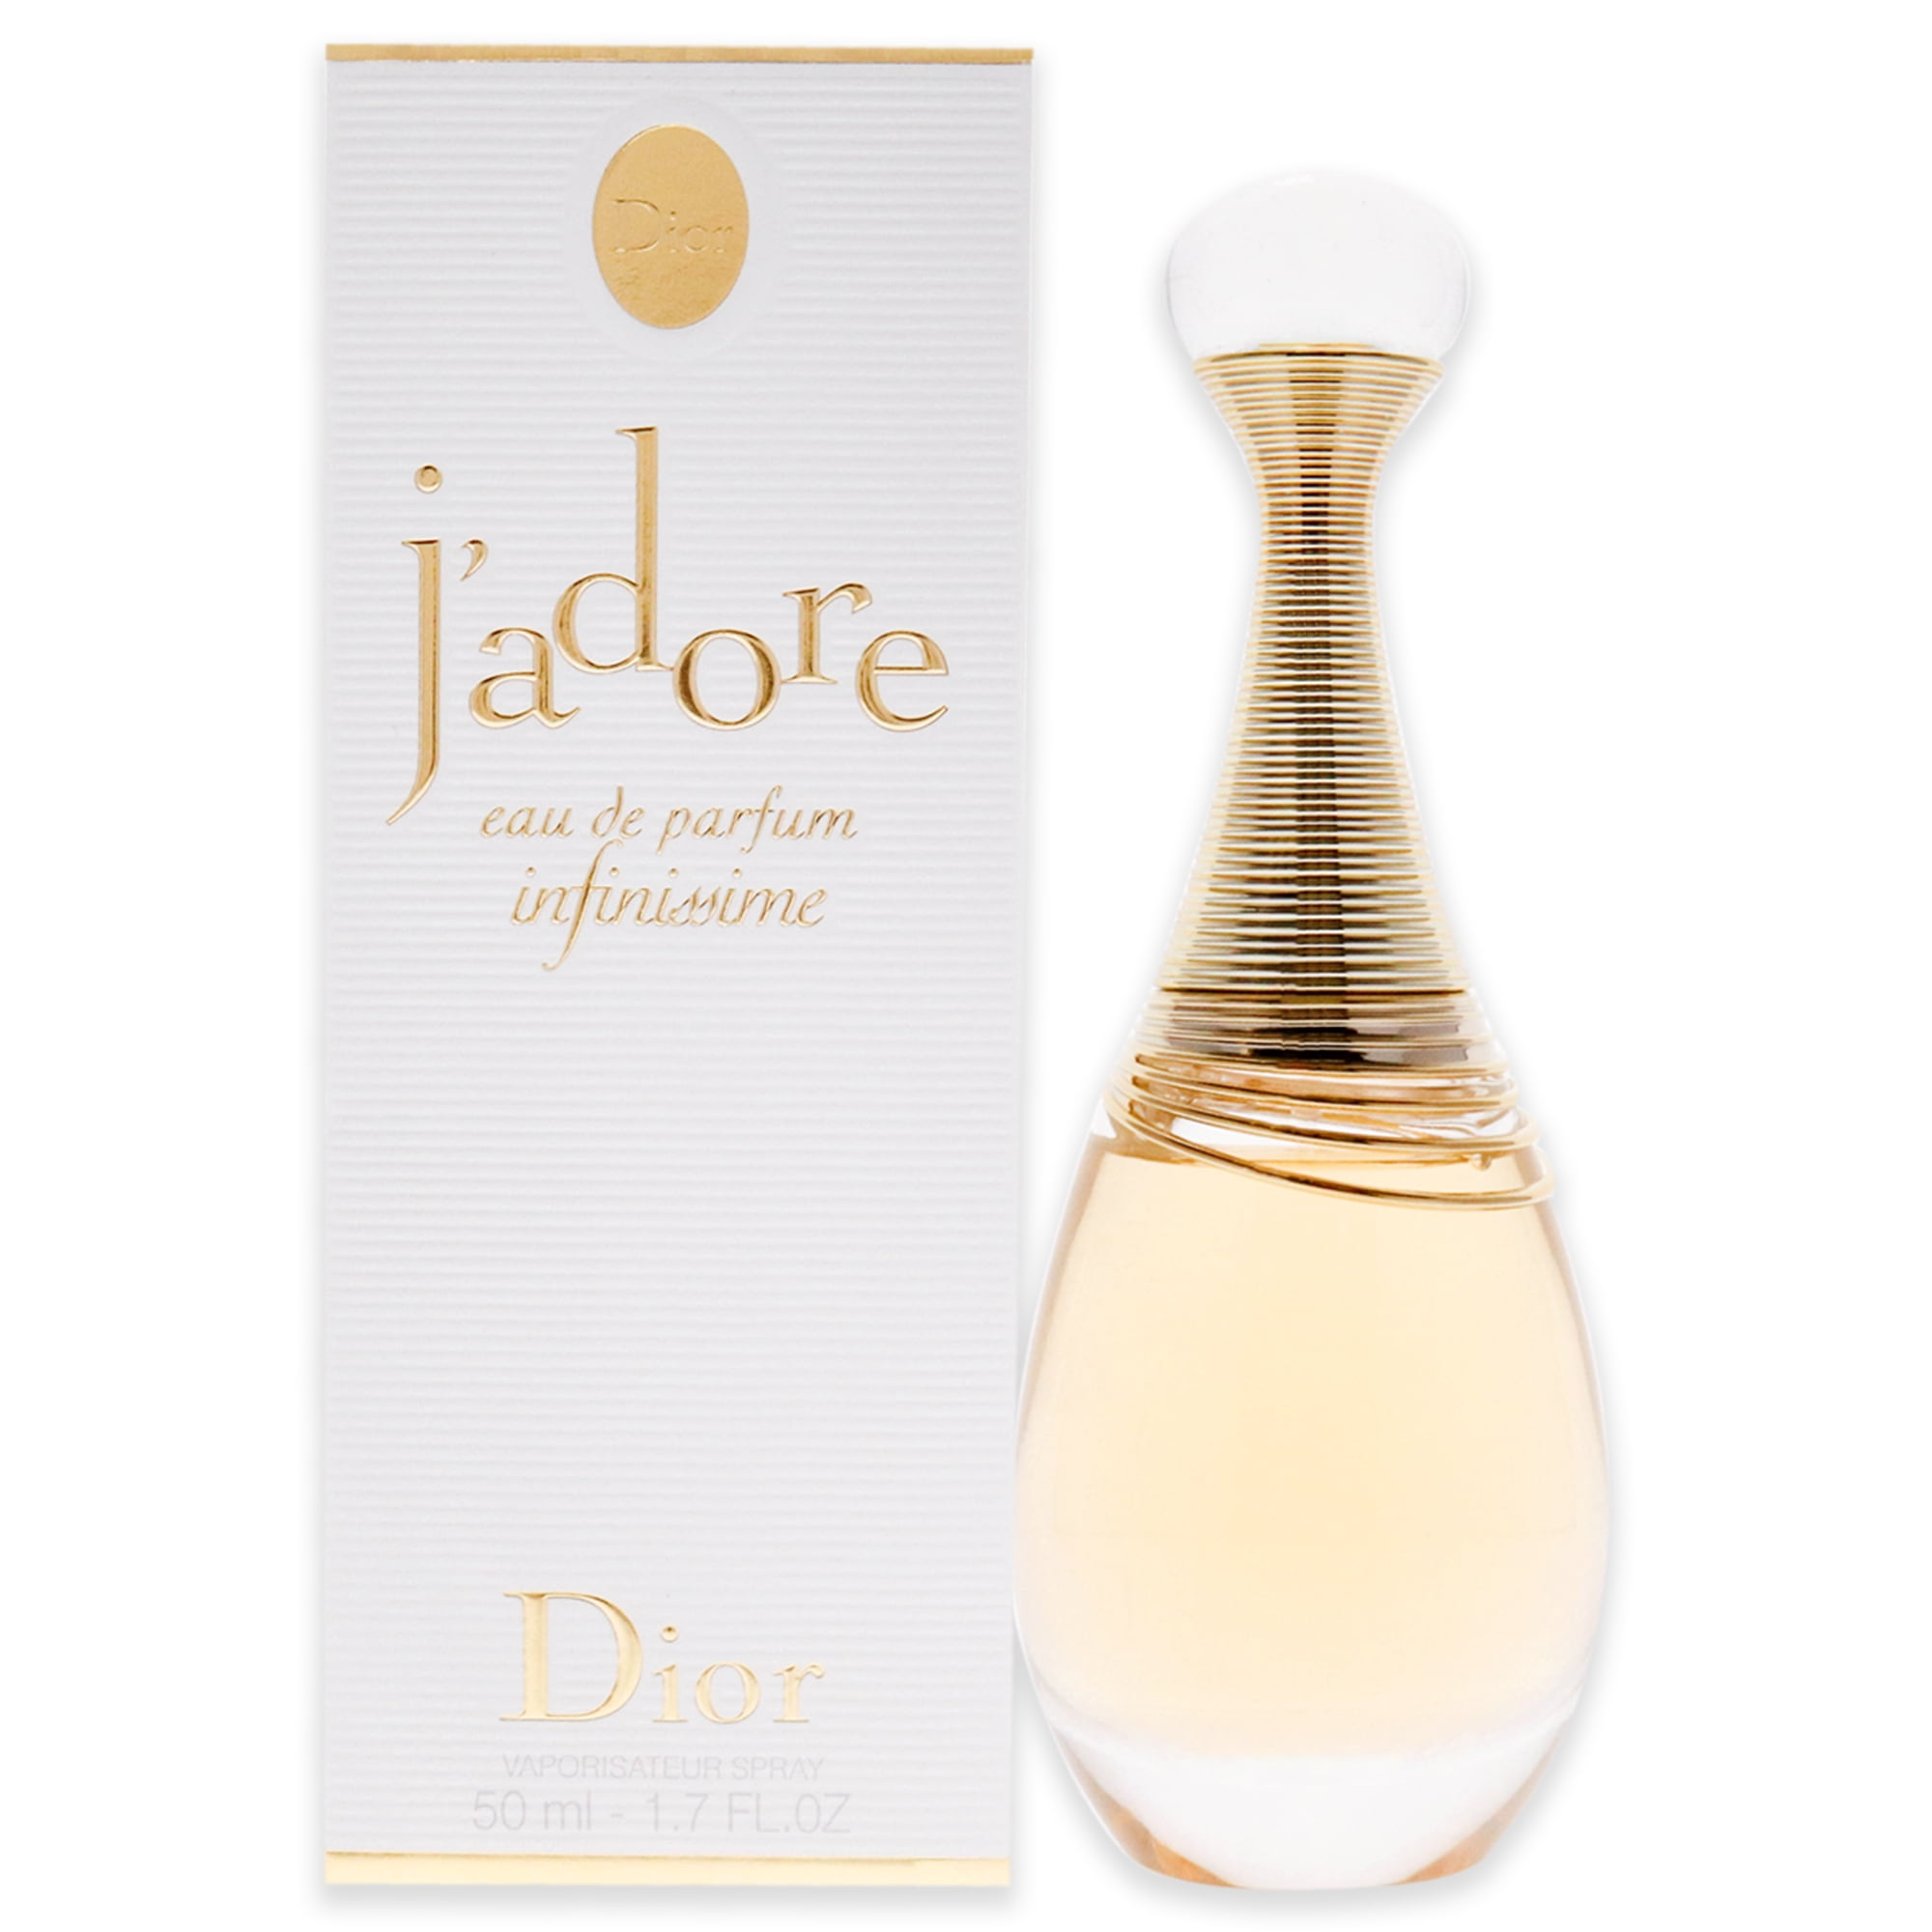 Dior Jadore Edp Perfume for Women by Christian Dior in Canada   Perfumeonlineca